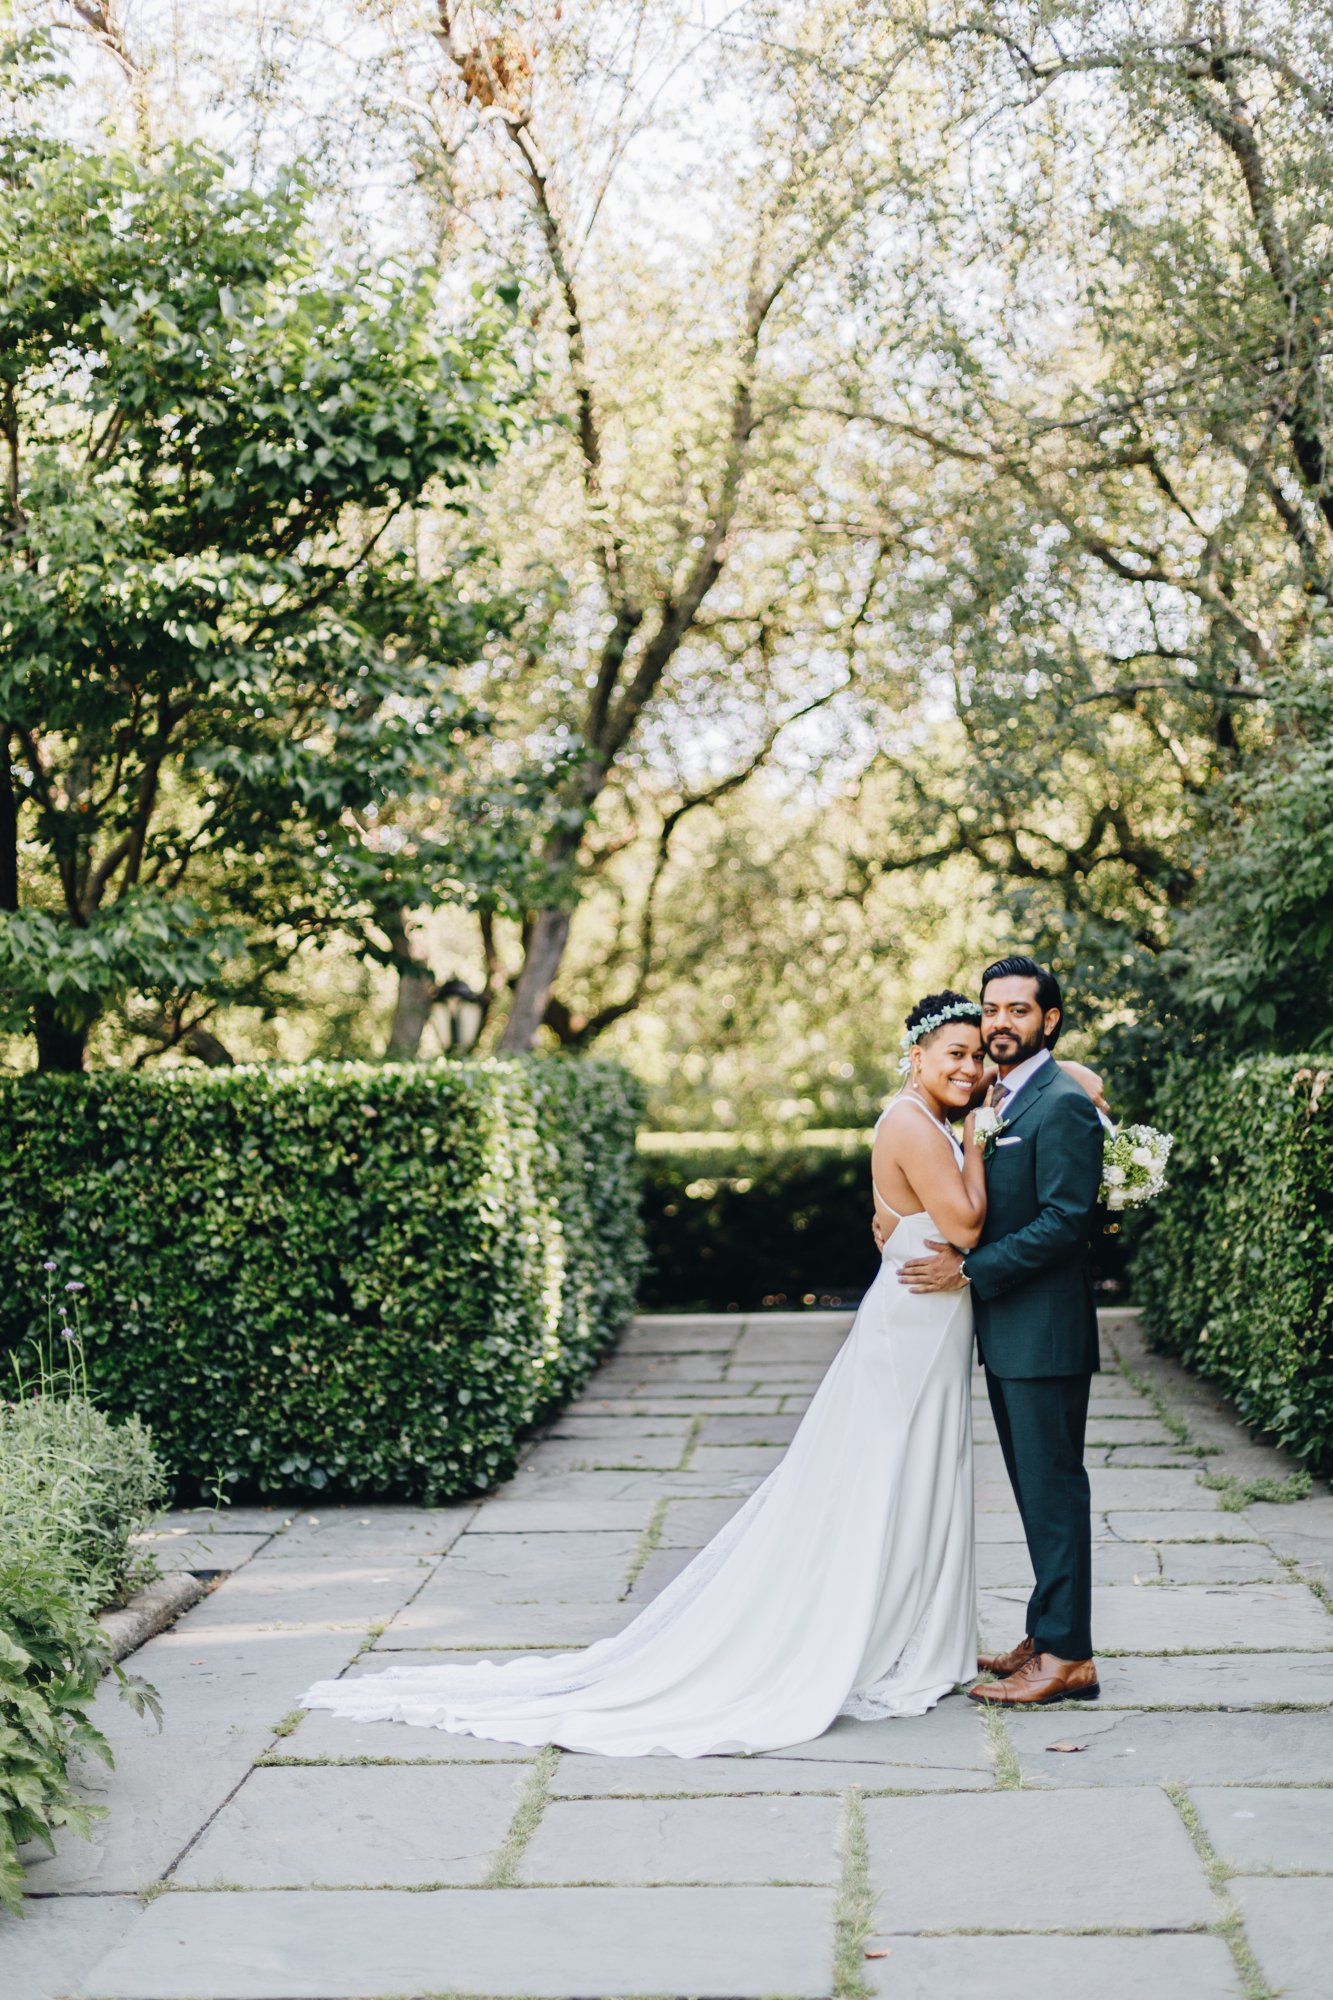 The best time to hire a New York wedding photographer